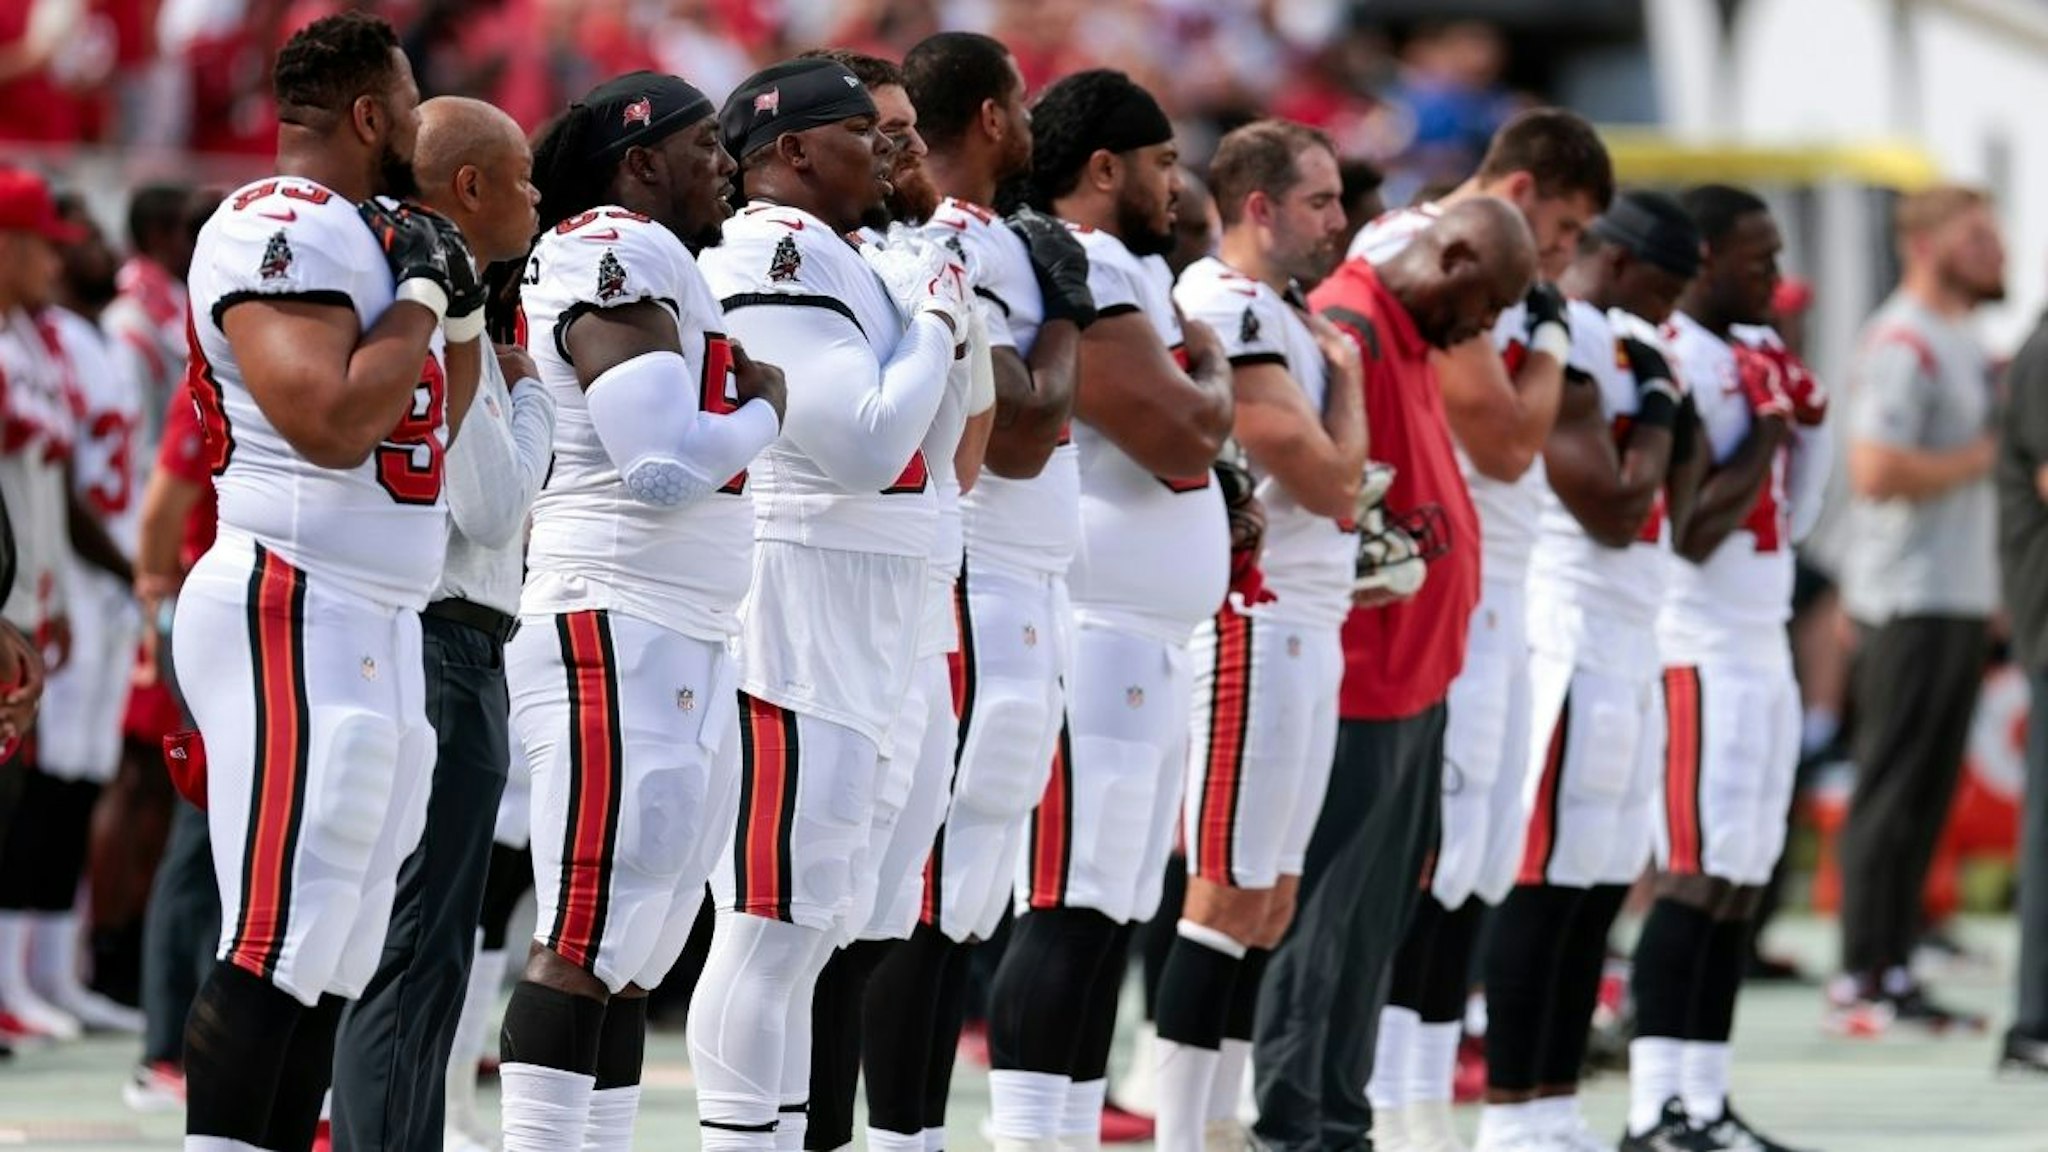 Rakeem Nunez-Roches #56 of the Tampa Bay Buccaneers stands with other players during the National Anthem prior to the game against the Atlanta Falcons at Raymond James Stadium on September 19, 2021 in Tampa, Florida.